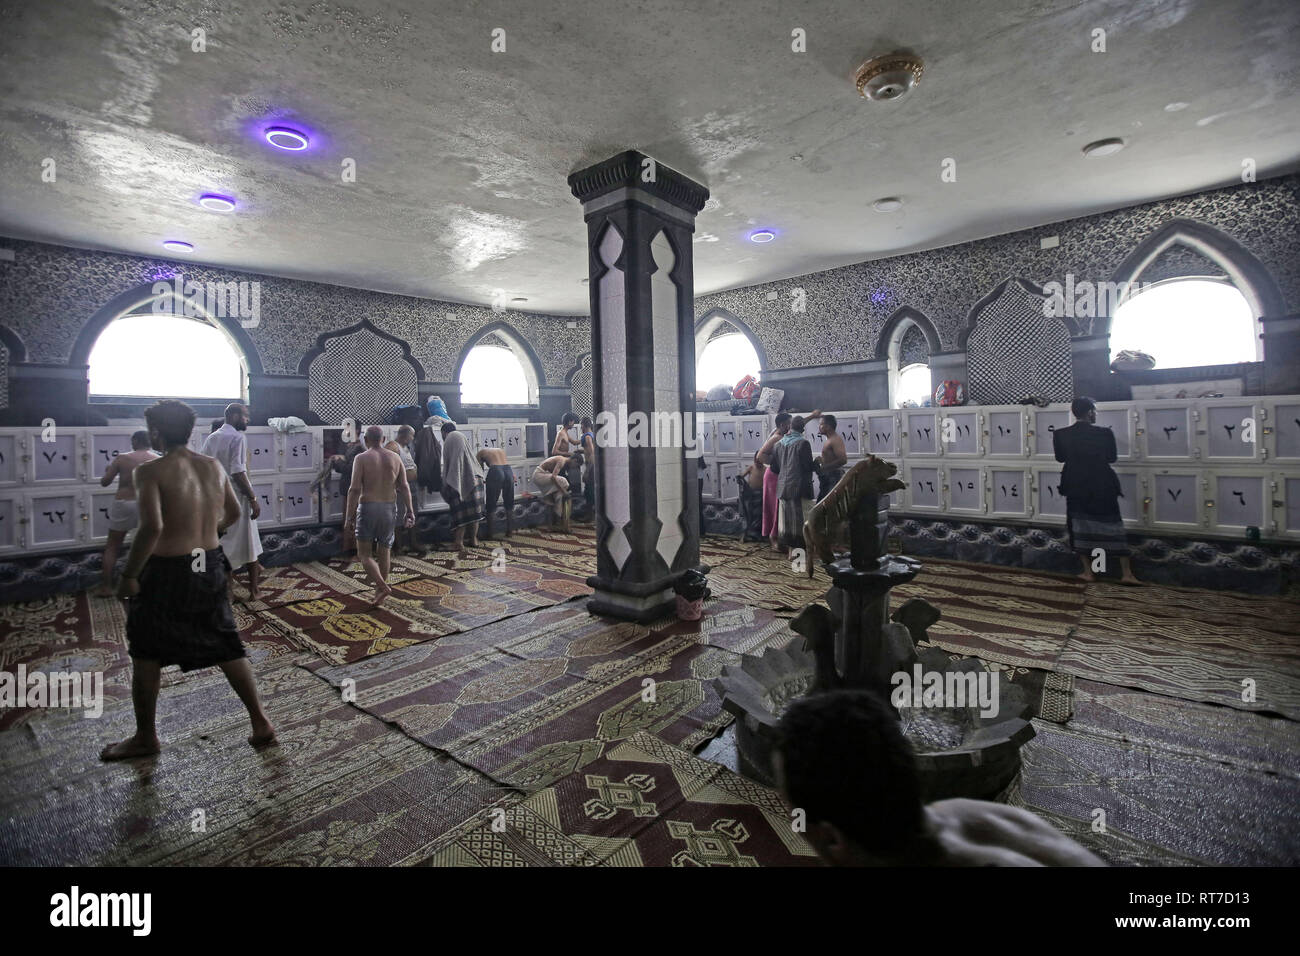 https://c8.alamy.com/comp/RT7D13/sanaa-yemen-28th-feb-2019-yemenis-stand-in-the-locker-room-at-a-traditional-turkish-style-steam-bath-yemenis-go-to-a-traditional-turkish-style-steam-bath-in-sanaa-in-search-of-rare-commodity-hot-and-flowing-water-as-almost-four-years-of-war-have-left-homes-across-yemen-without-water-supplies-and-power-also-a-few-of-people-go-to-relax-with-steam-scrubs-and-massages-credit-hani-al-ansidpaalamy-live-news-RT7D13.jpg